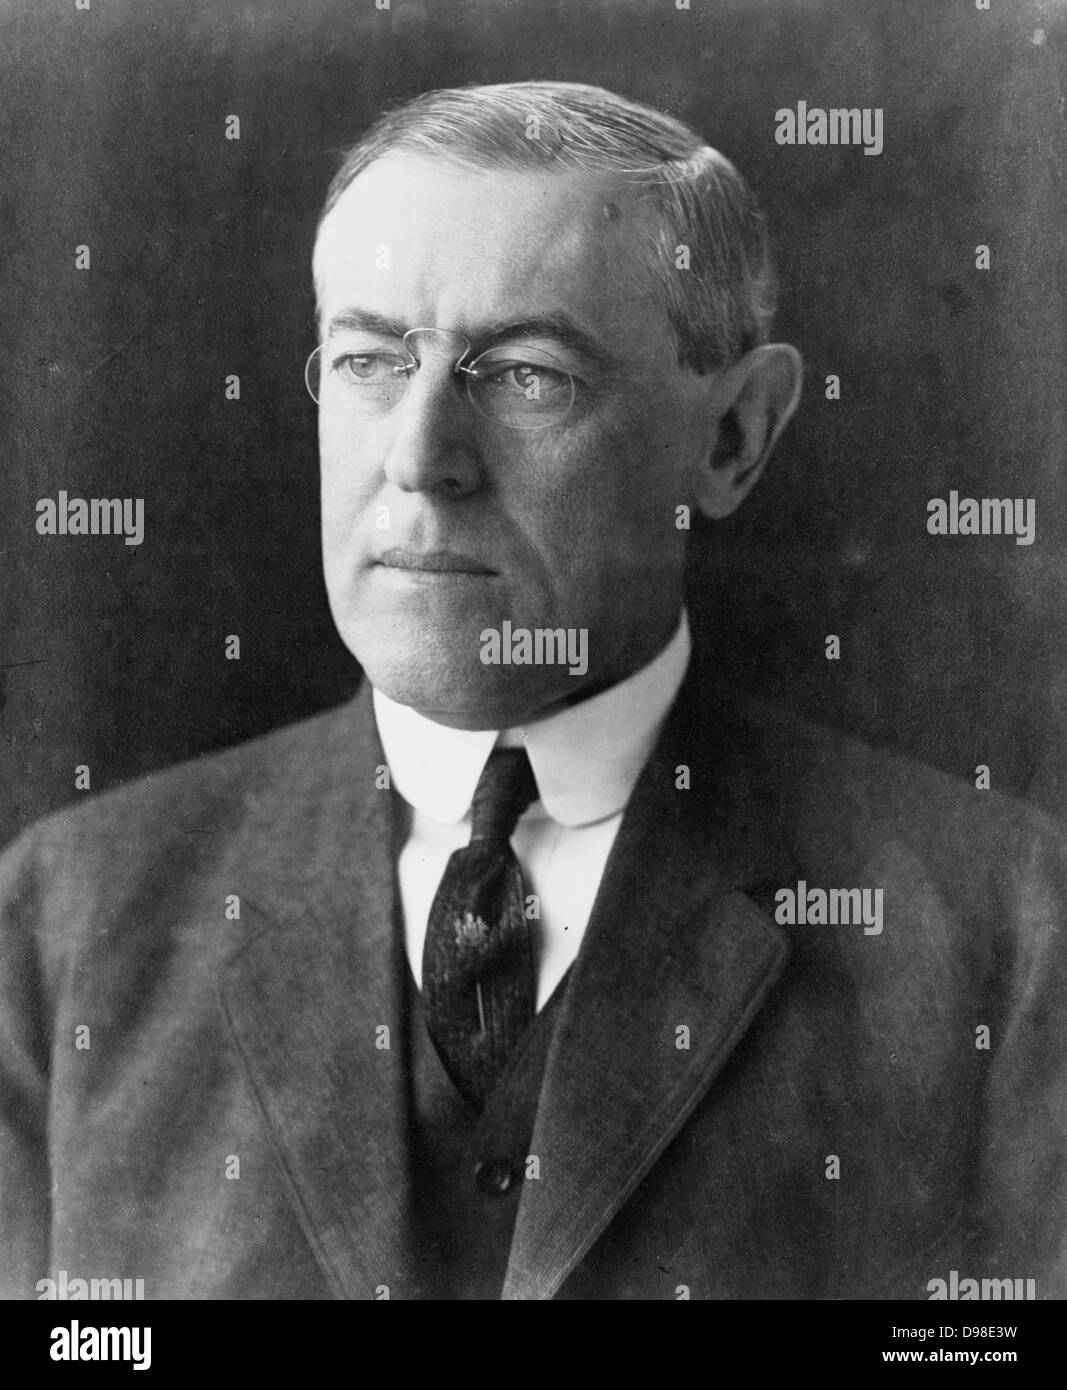 (Thomas) Woodrow Wilson (1856-1924) 28th President of the United States of America 1913-1921 throughout the First World War. Suffered a severe stroke in October 1919 leaving him partially incapacitated. Photographic portrait December 1912. Stock Photo